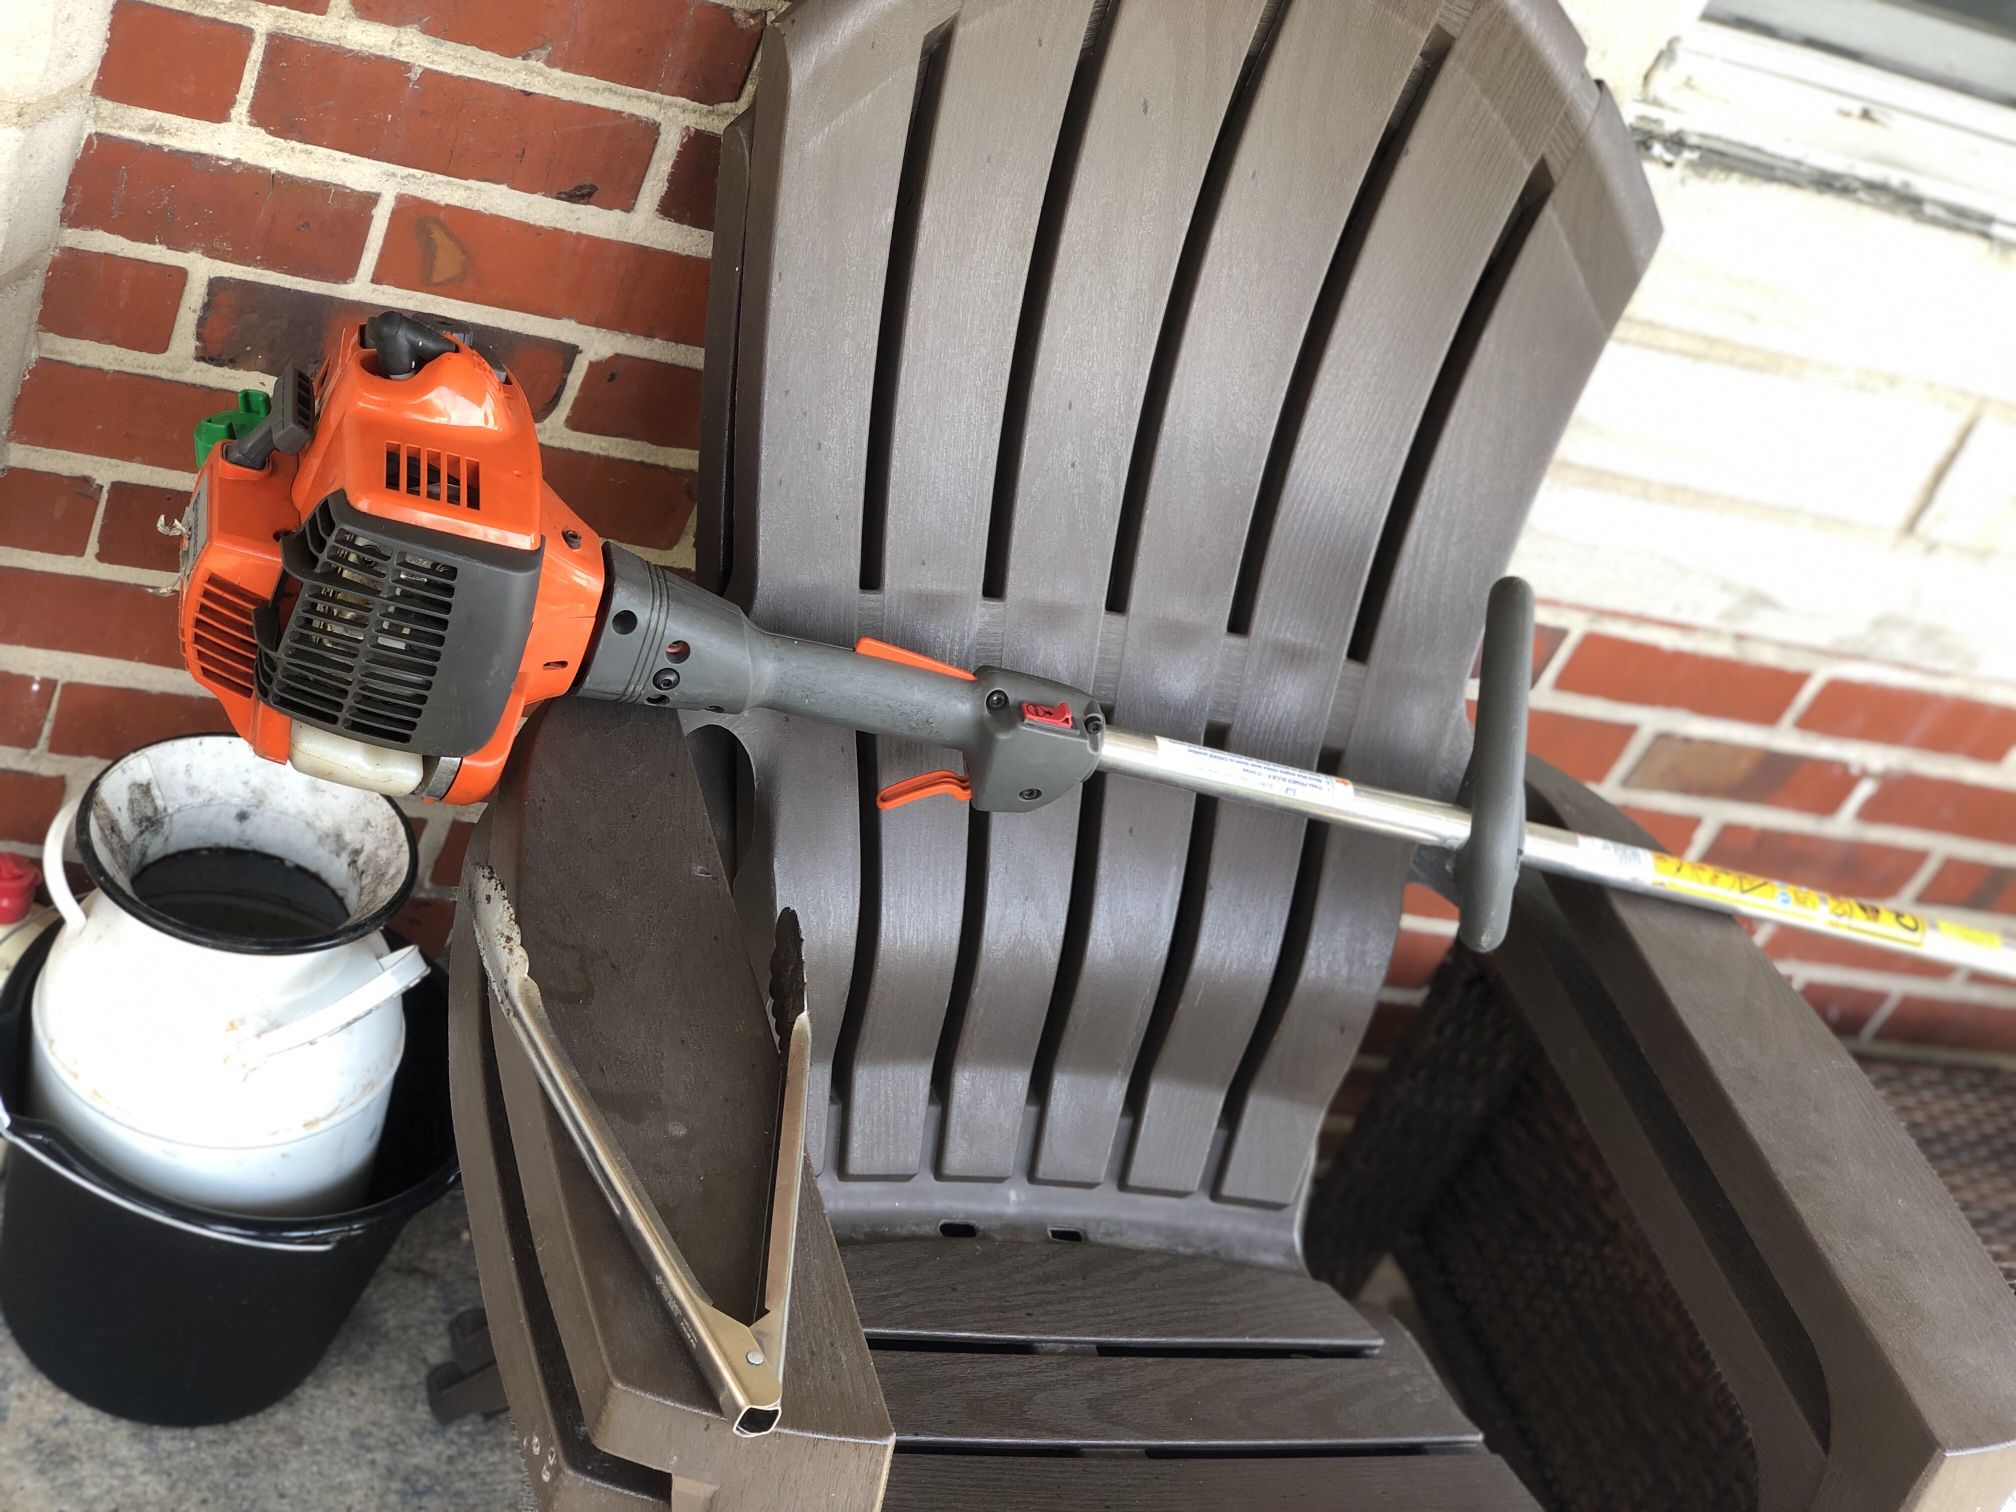 Husqvarna 223L Weed Eater for Sale in Baltimore, MD - OfferUp